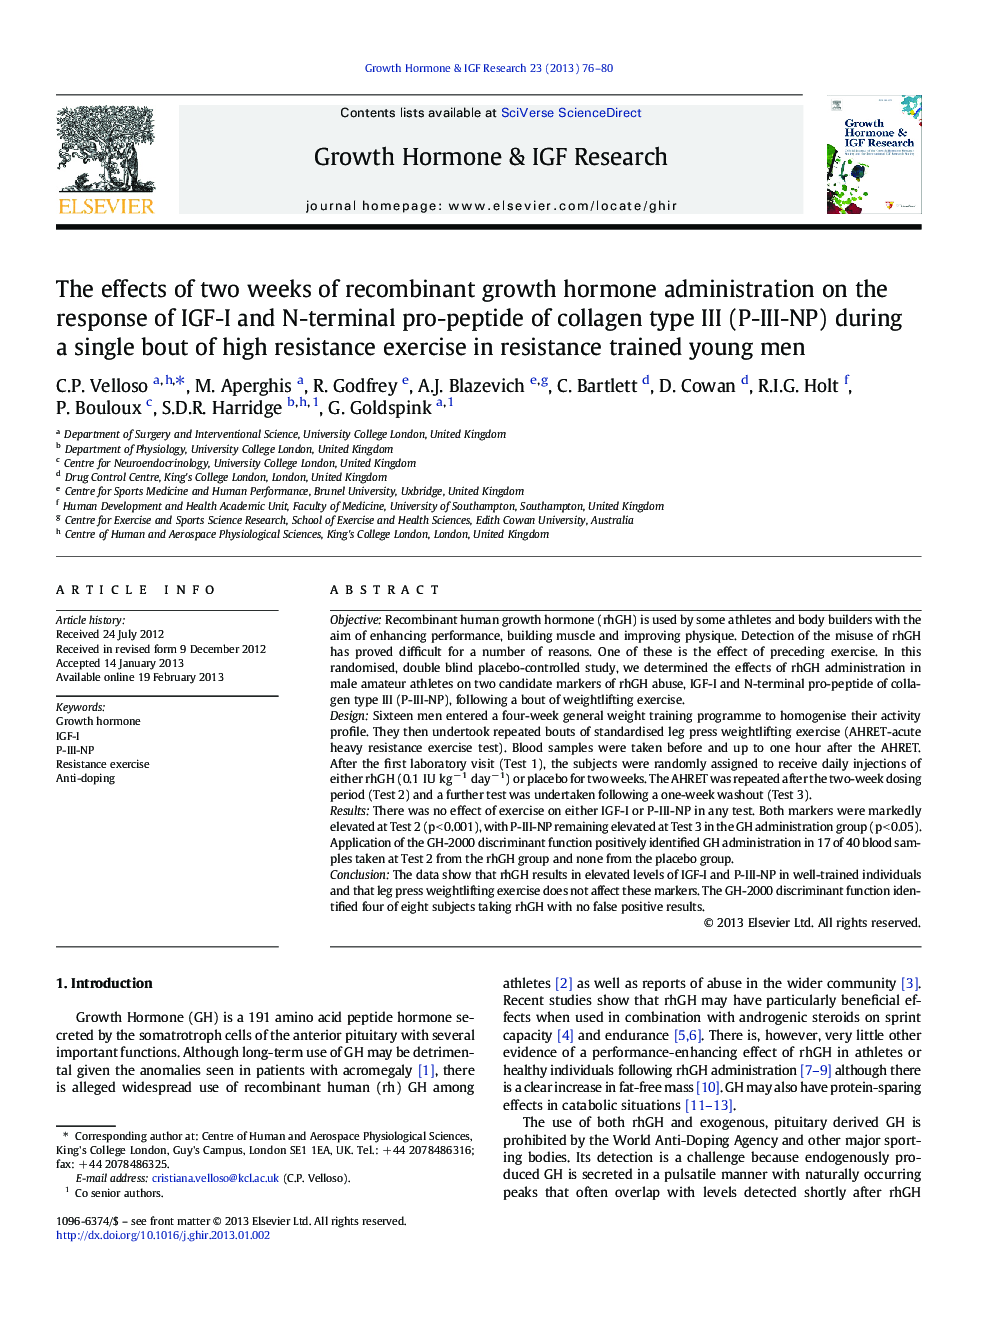 The effects of two weeks of recombinant growth hormone administration on the response of IGF-I and N-terminal pro-peptide of collagen type III (P-III-NP) during a single bout of high resistance exercise in resistance trained young men